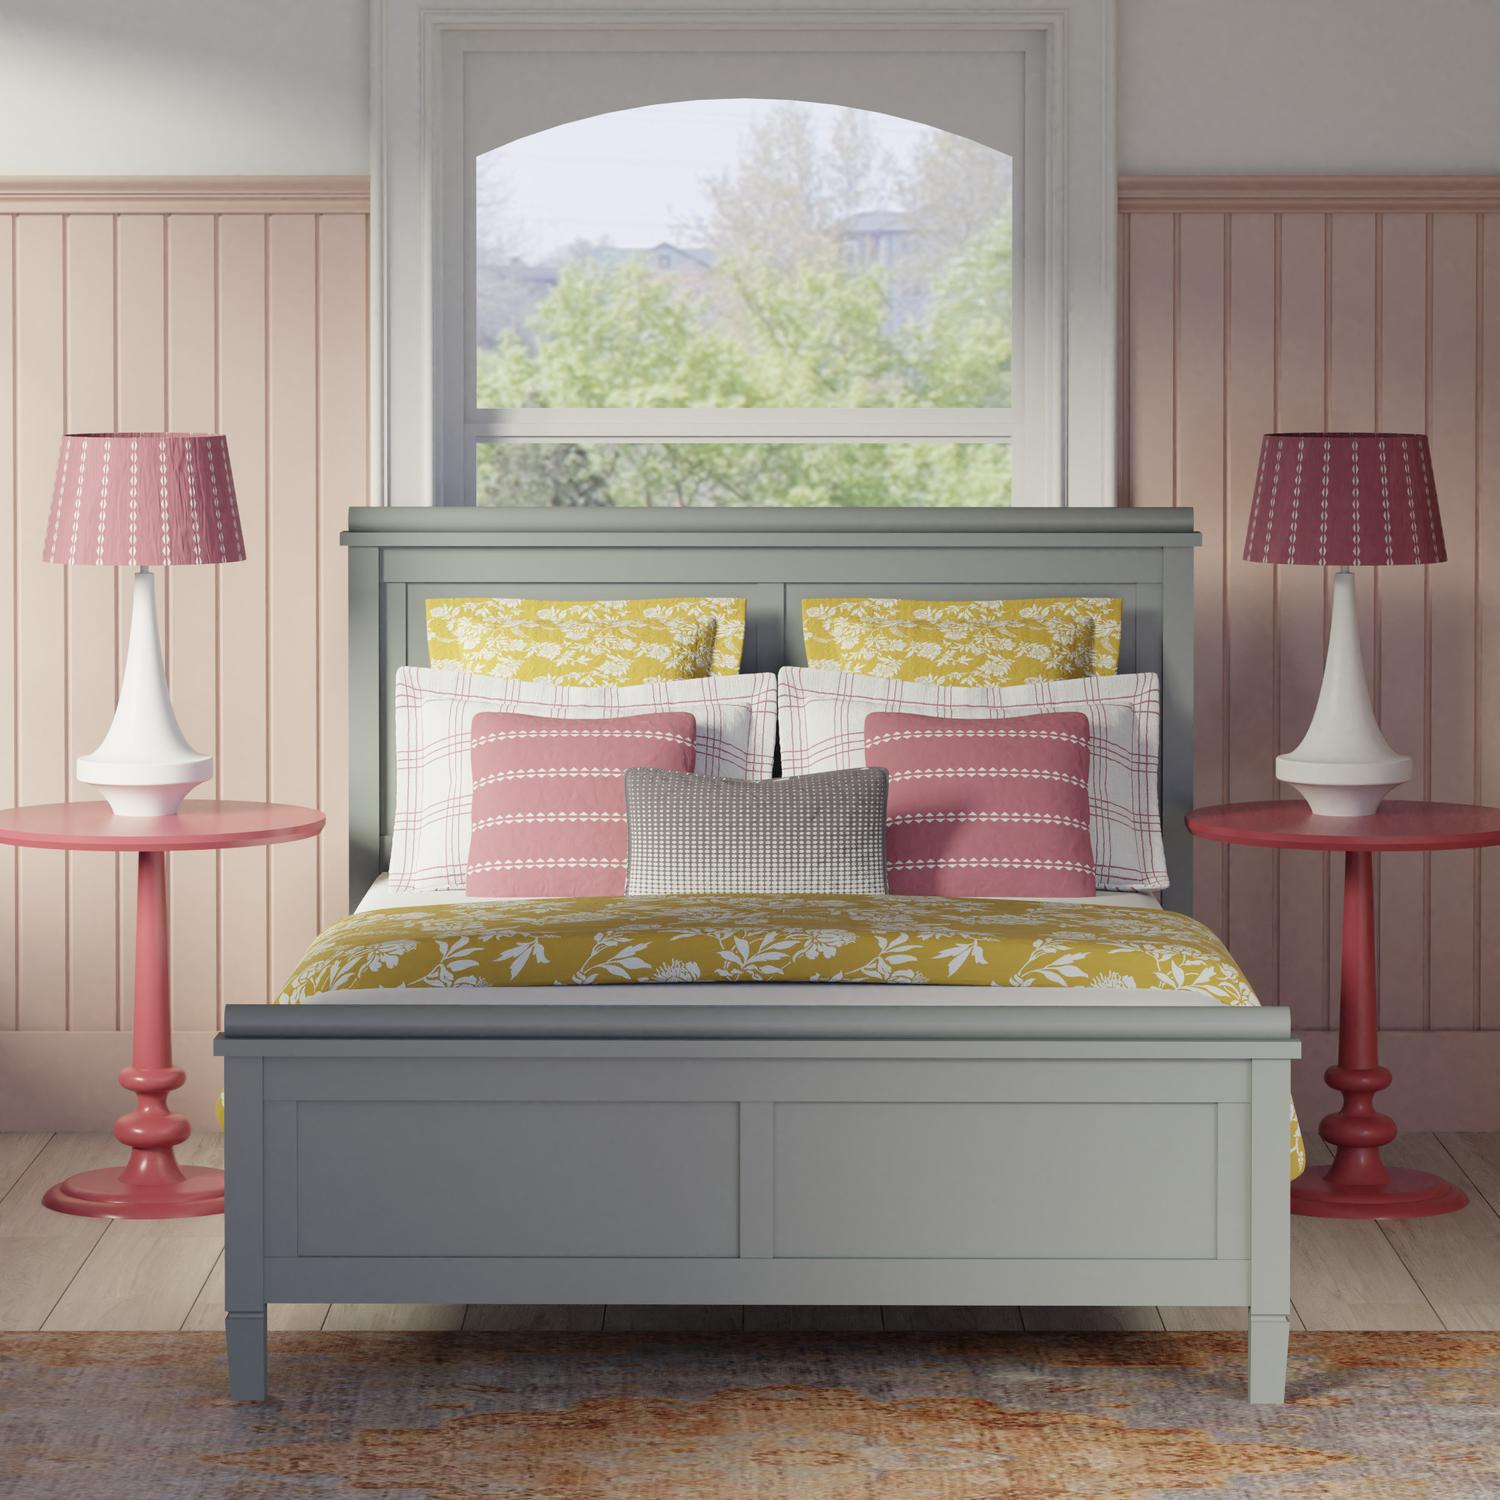 Nocturne wooden bed - Image pink and yellow bedroom